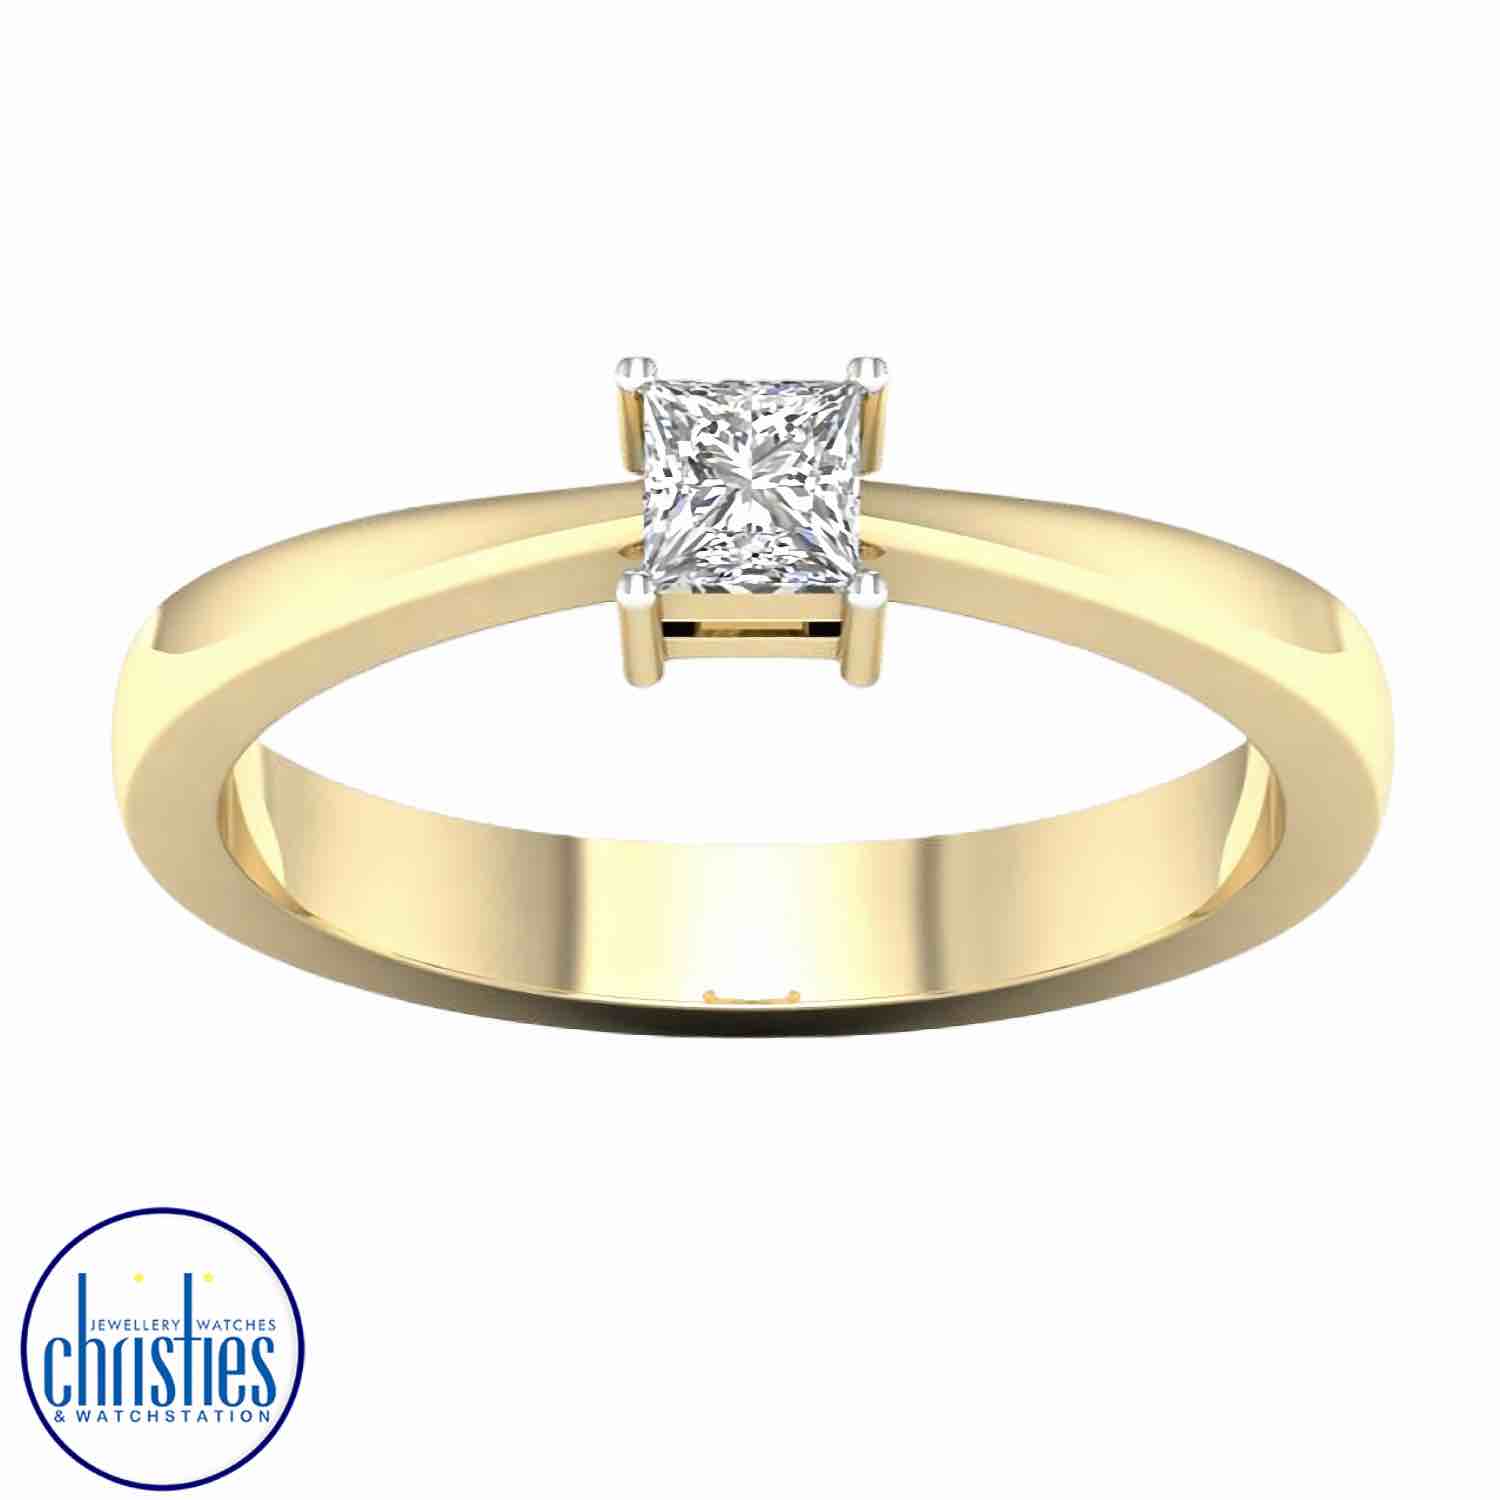 9ct Yellow Gold Princess Cut Diamond Solitaire Ring 0.25ct RS1334.  Affordable Engagement Rings Nz $1,395.00